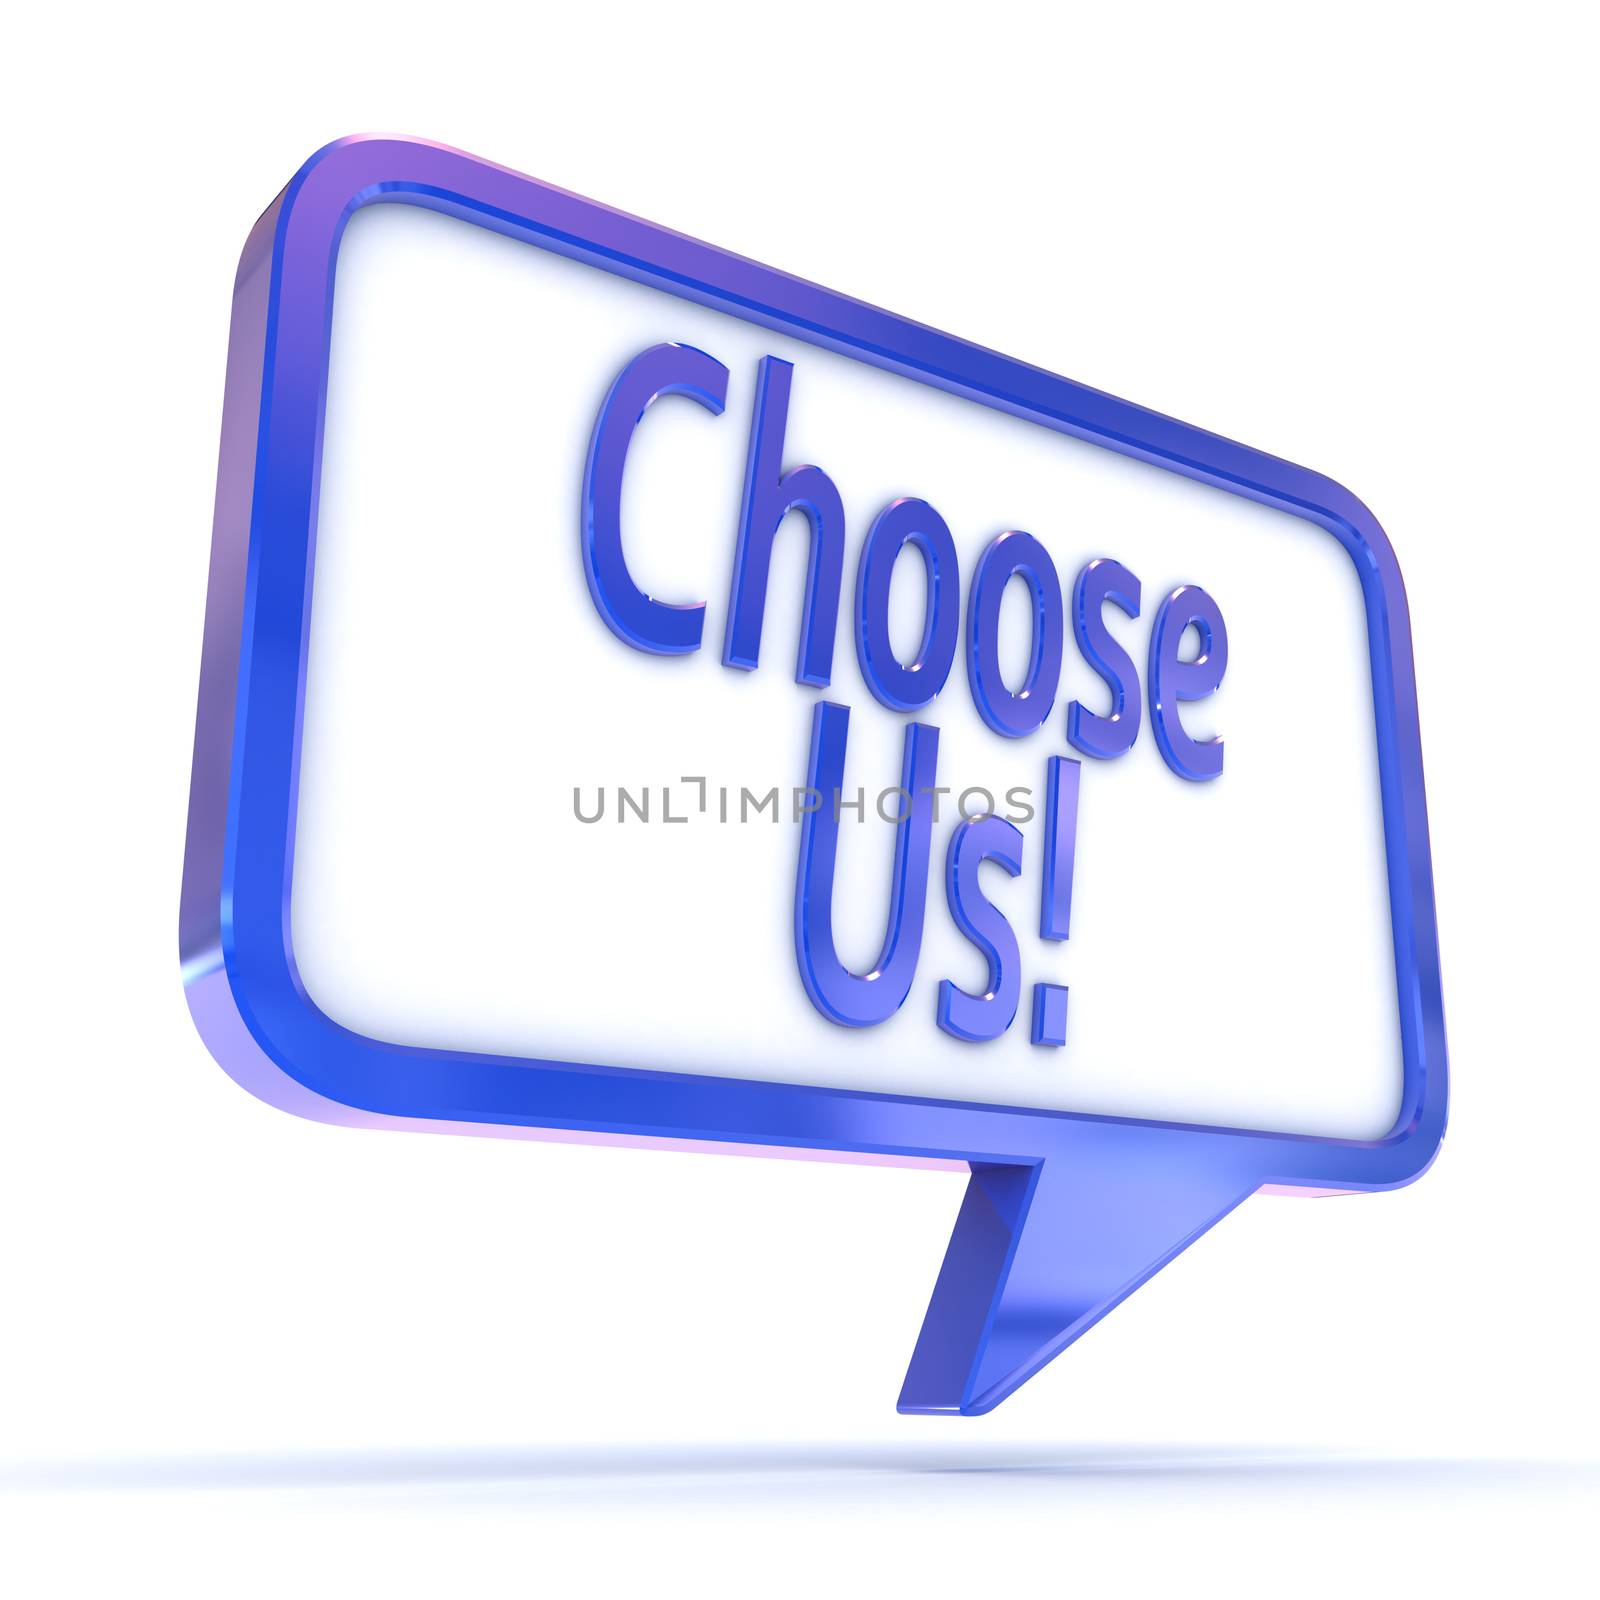 A Colourful 3d Rendered Concept Illustration showing "Choose Us" in a Speech Bubble